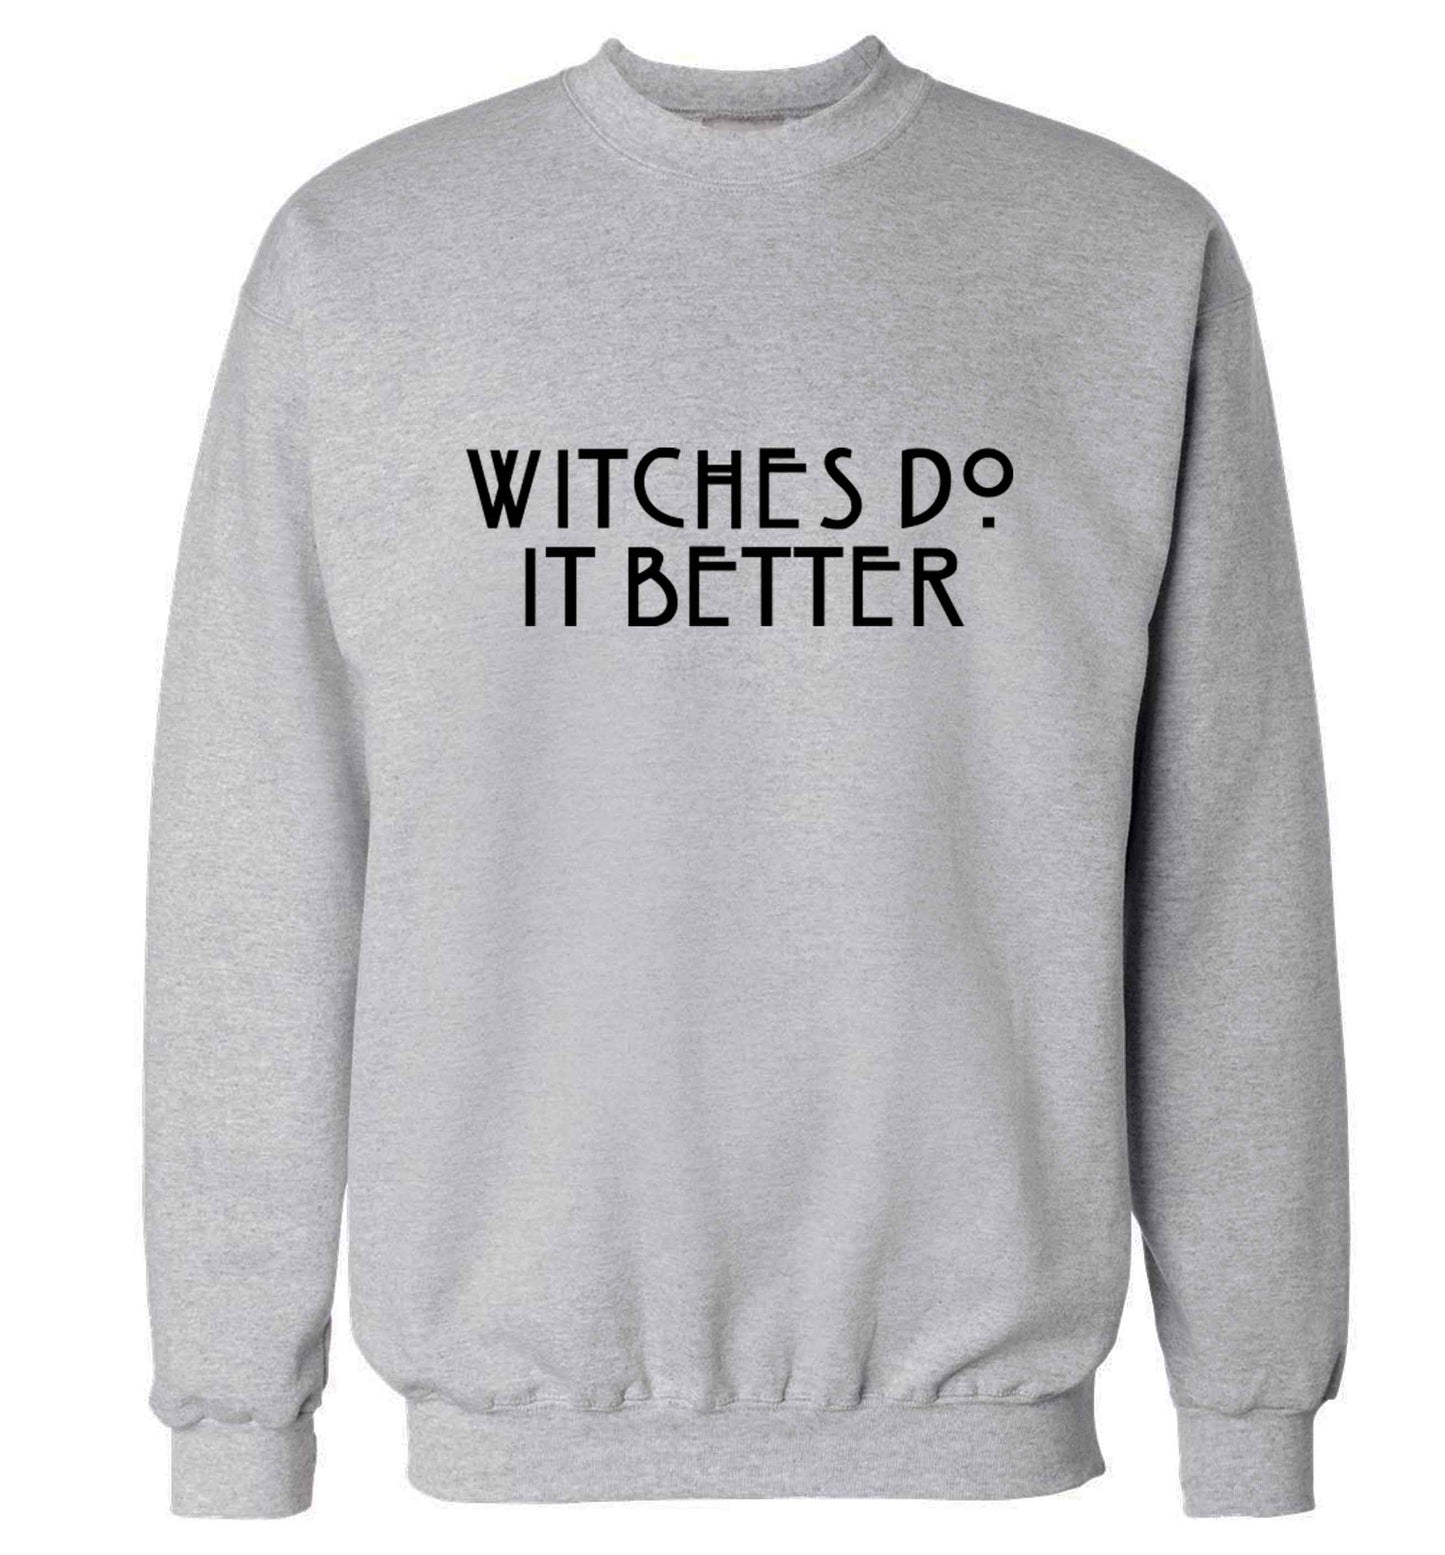 Witches do it better adult's unisex grey sweater 2XL